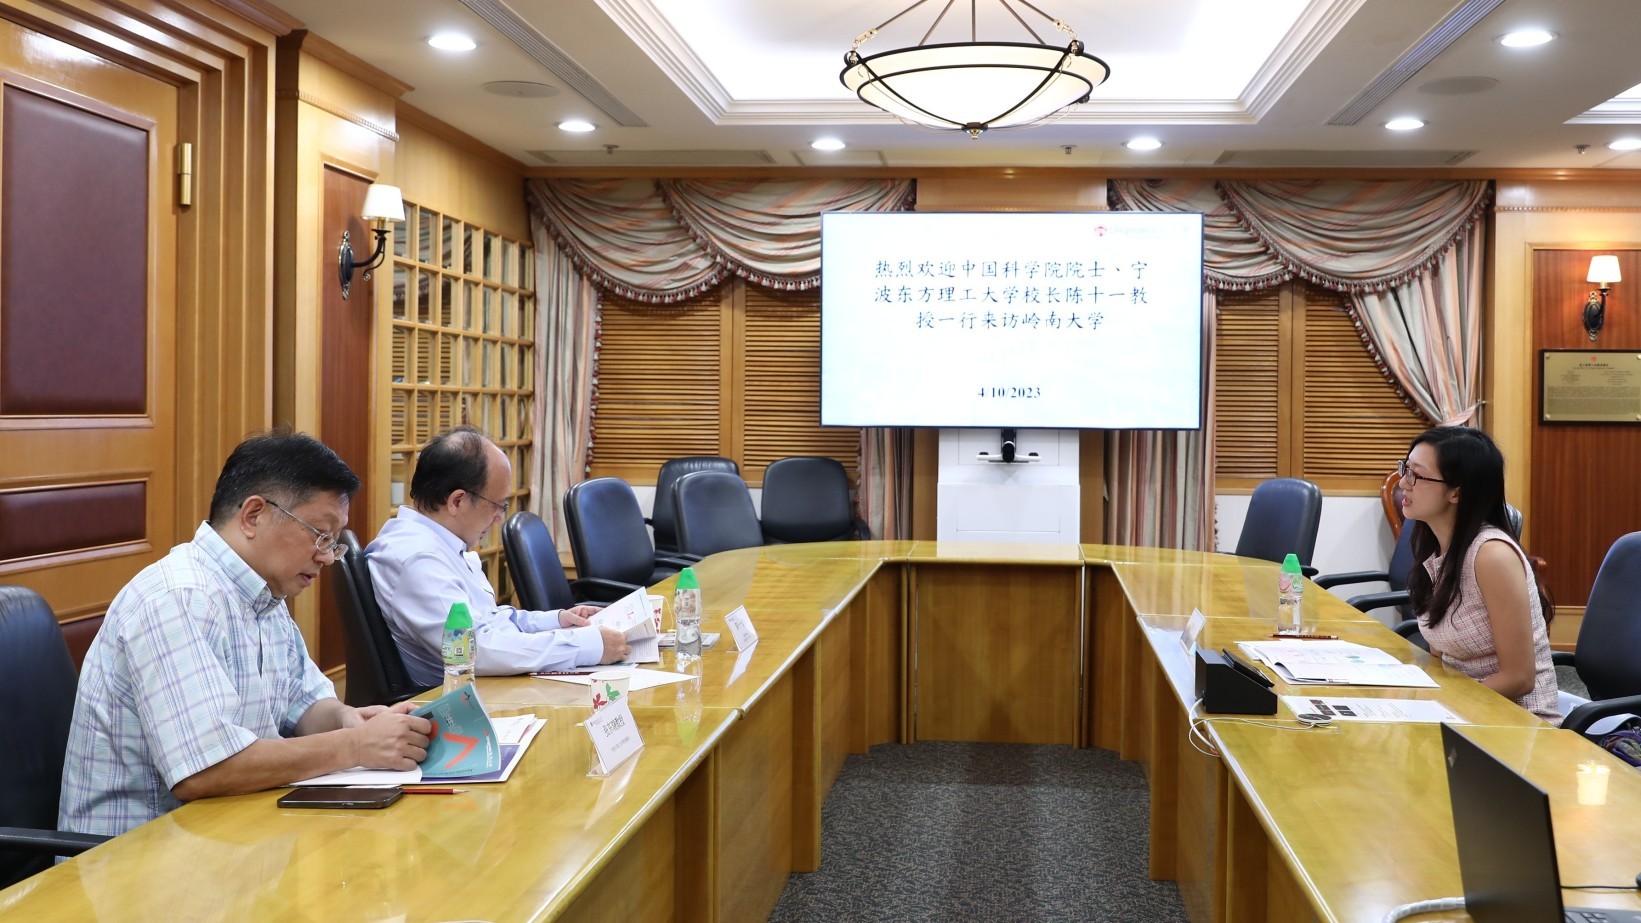 Delegation from Eastern Institute of Technology, Ningbo visits Lingnan